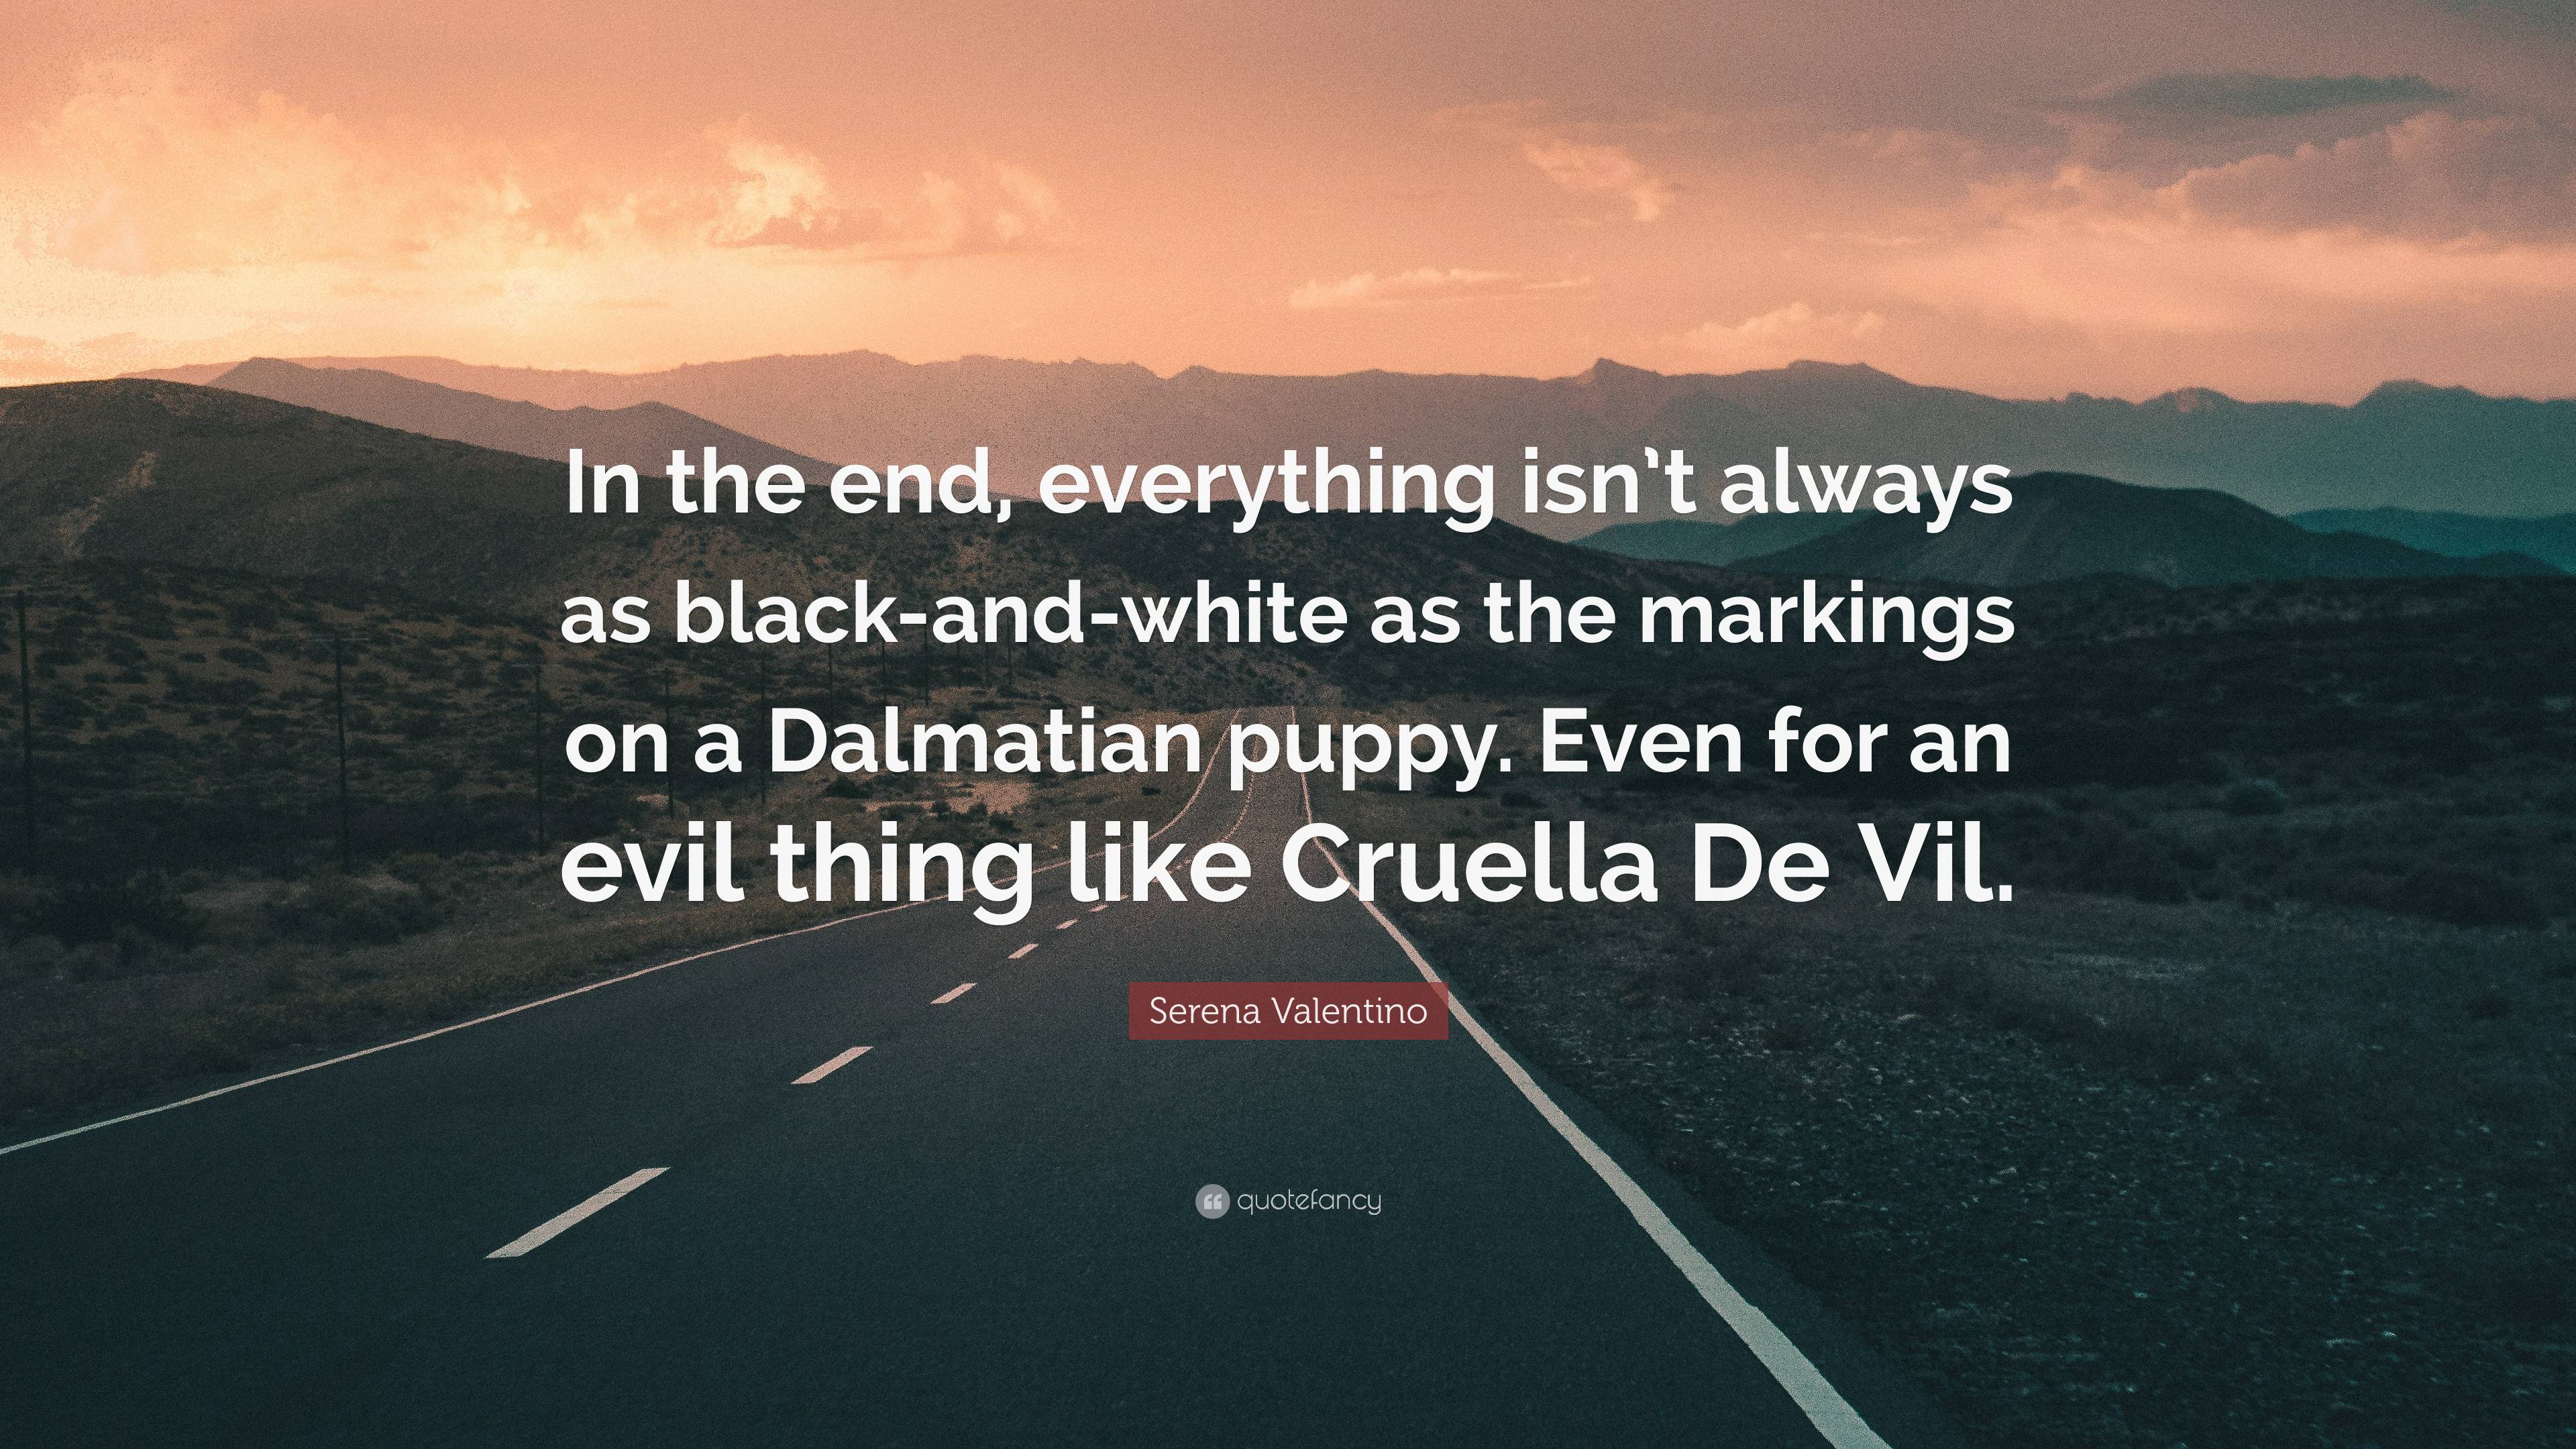 Serena Valentino Quote: “In the end, everything isn't always as black-and-white as the markings on a Dalmatian puppy. Even for an like...”